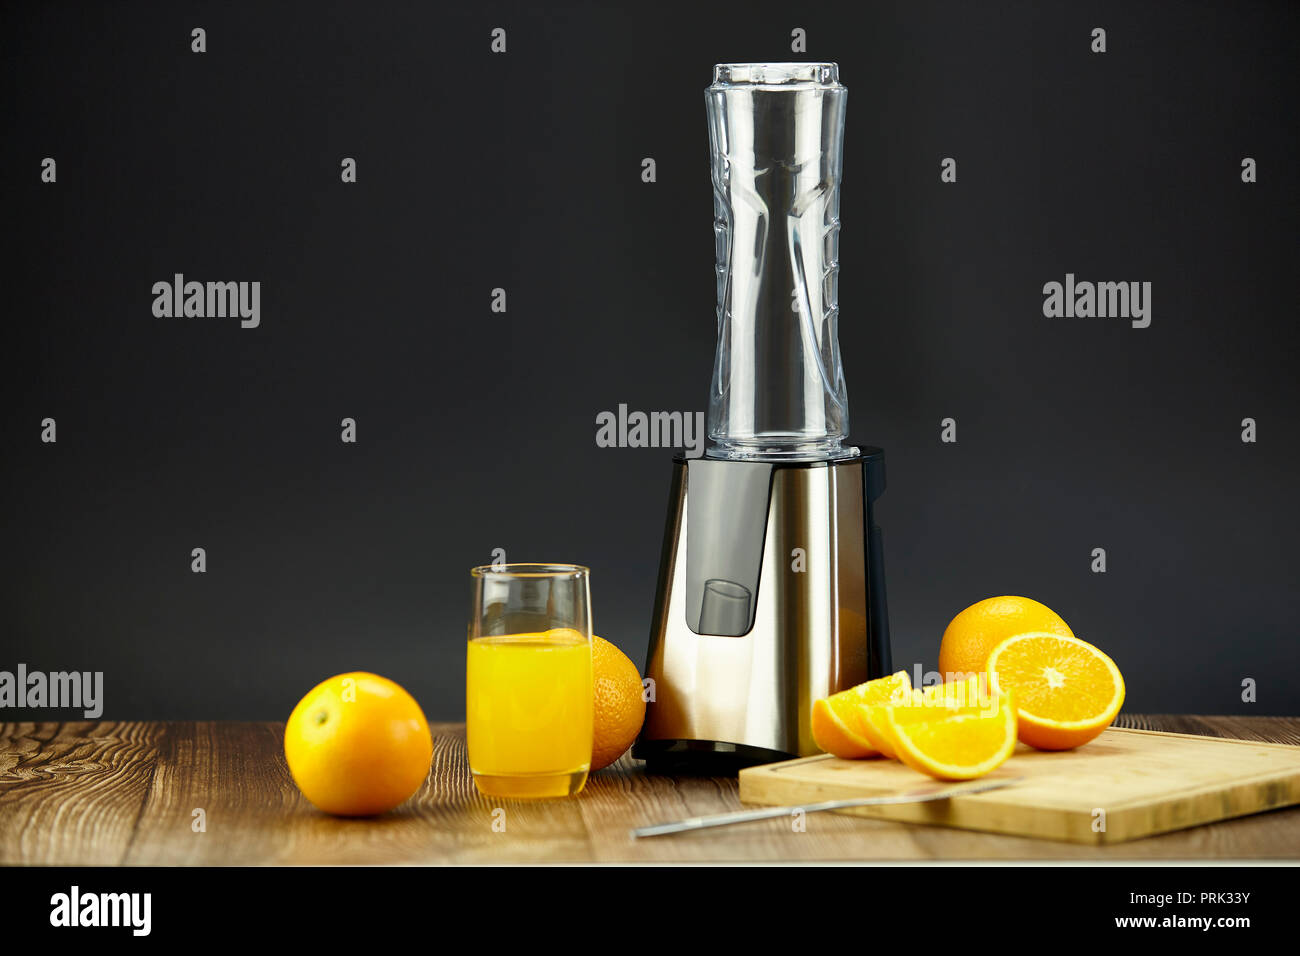 blender and orange juice with fresh oranges on table with black background. Stock Photo